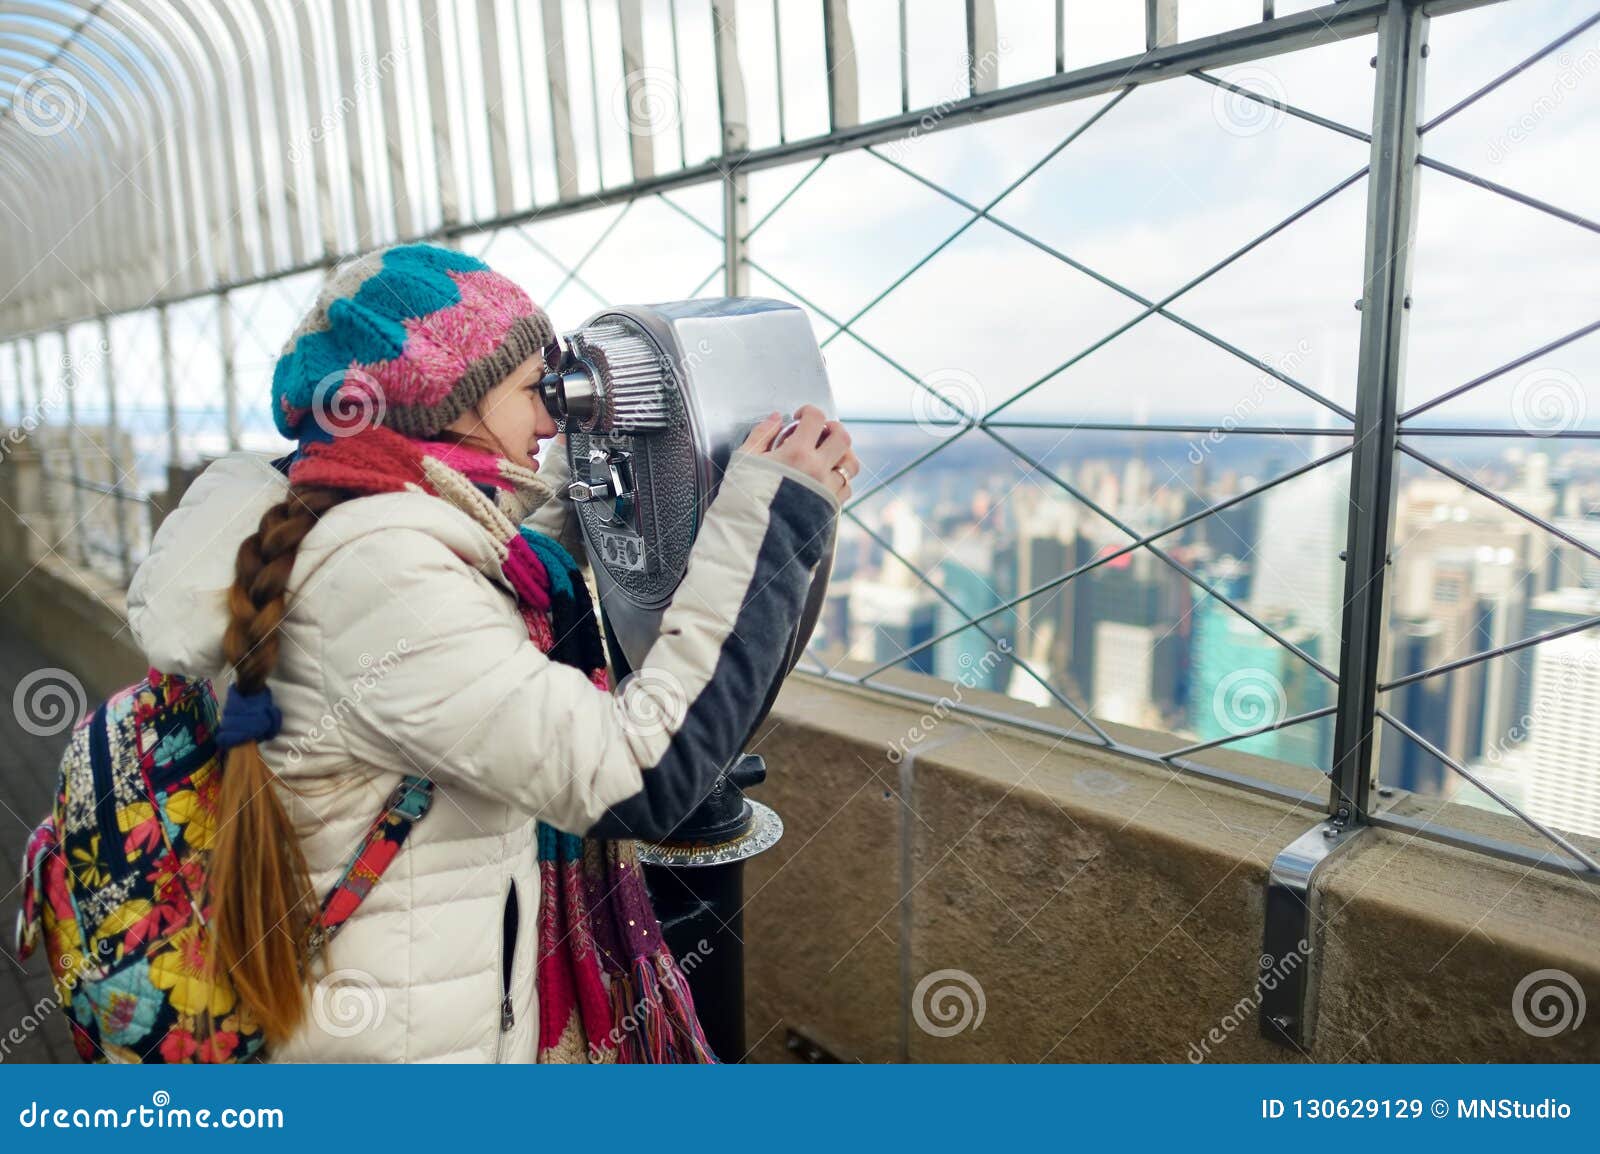 happy young woman tourist at the observation deck of empire state building in new york city. female traveler enjoying the view of